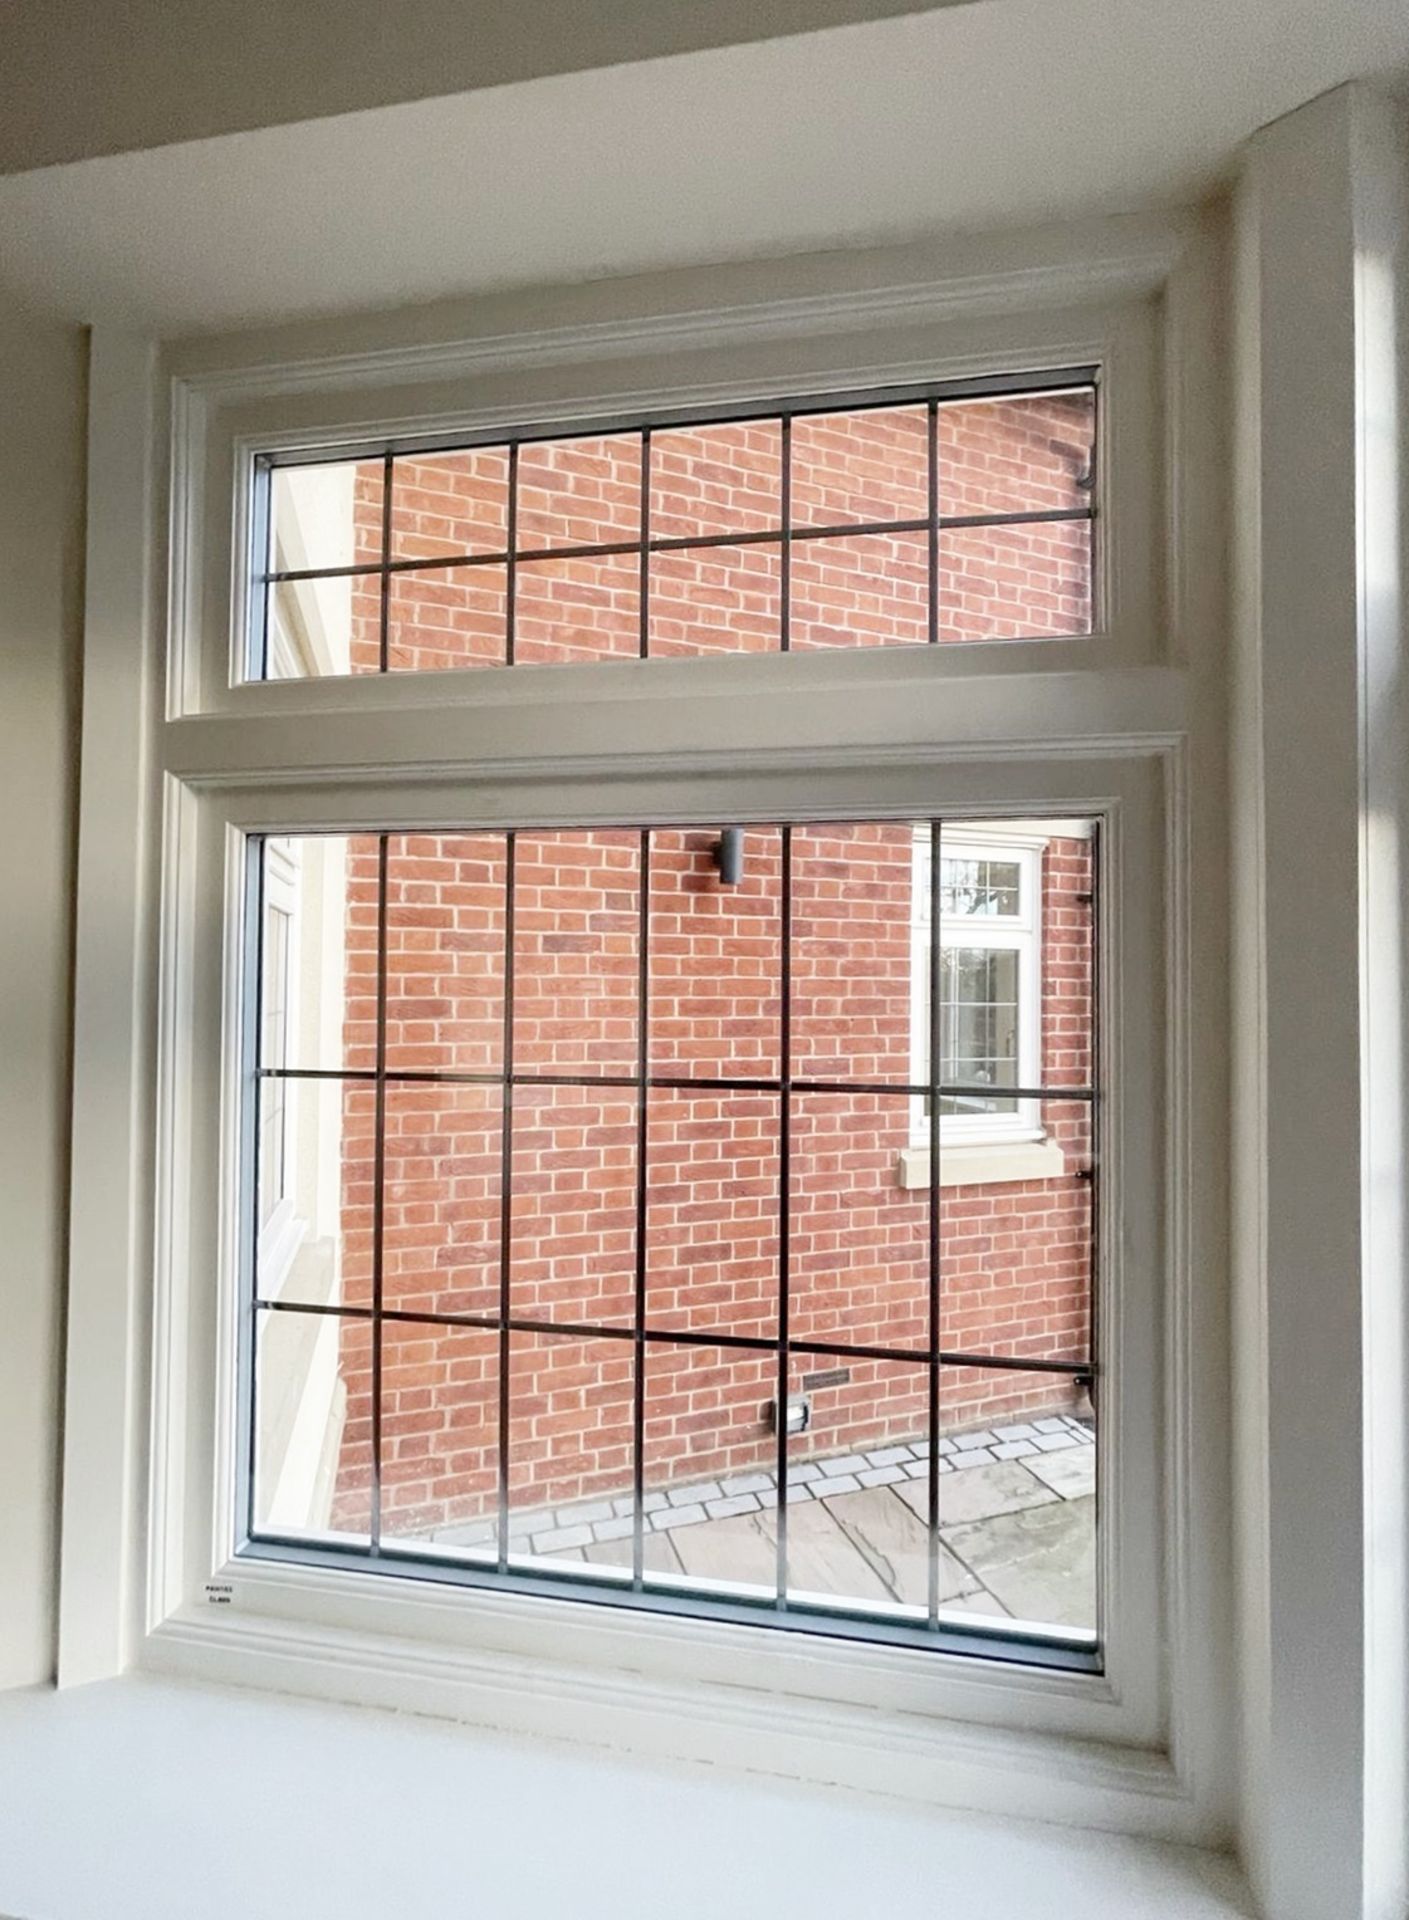 1 x Hardwood Timber Double Glazed Window Frame - Ref: PAN163 - CL896 - NO VAT ON THE HAMMER - Image 2 of 3